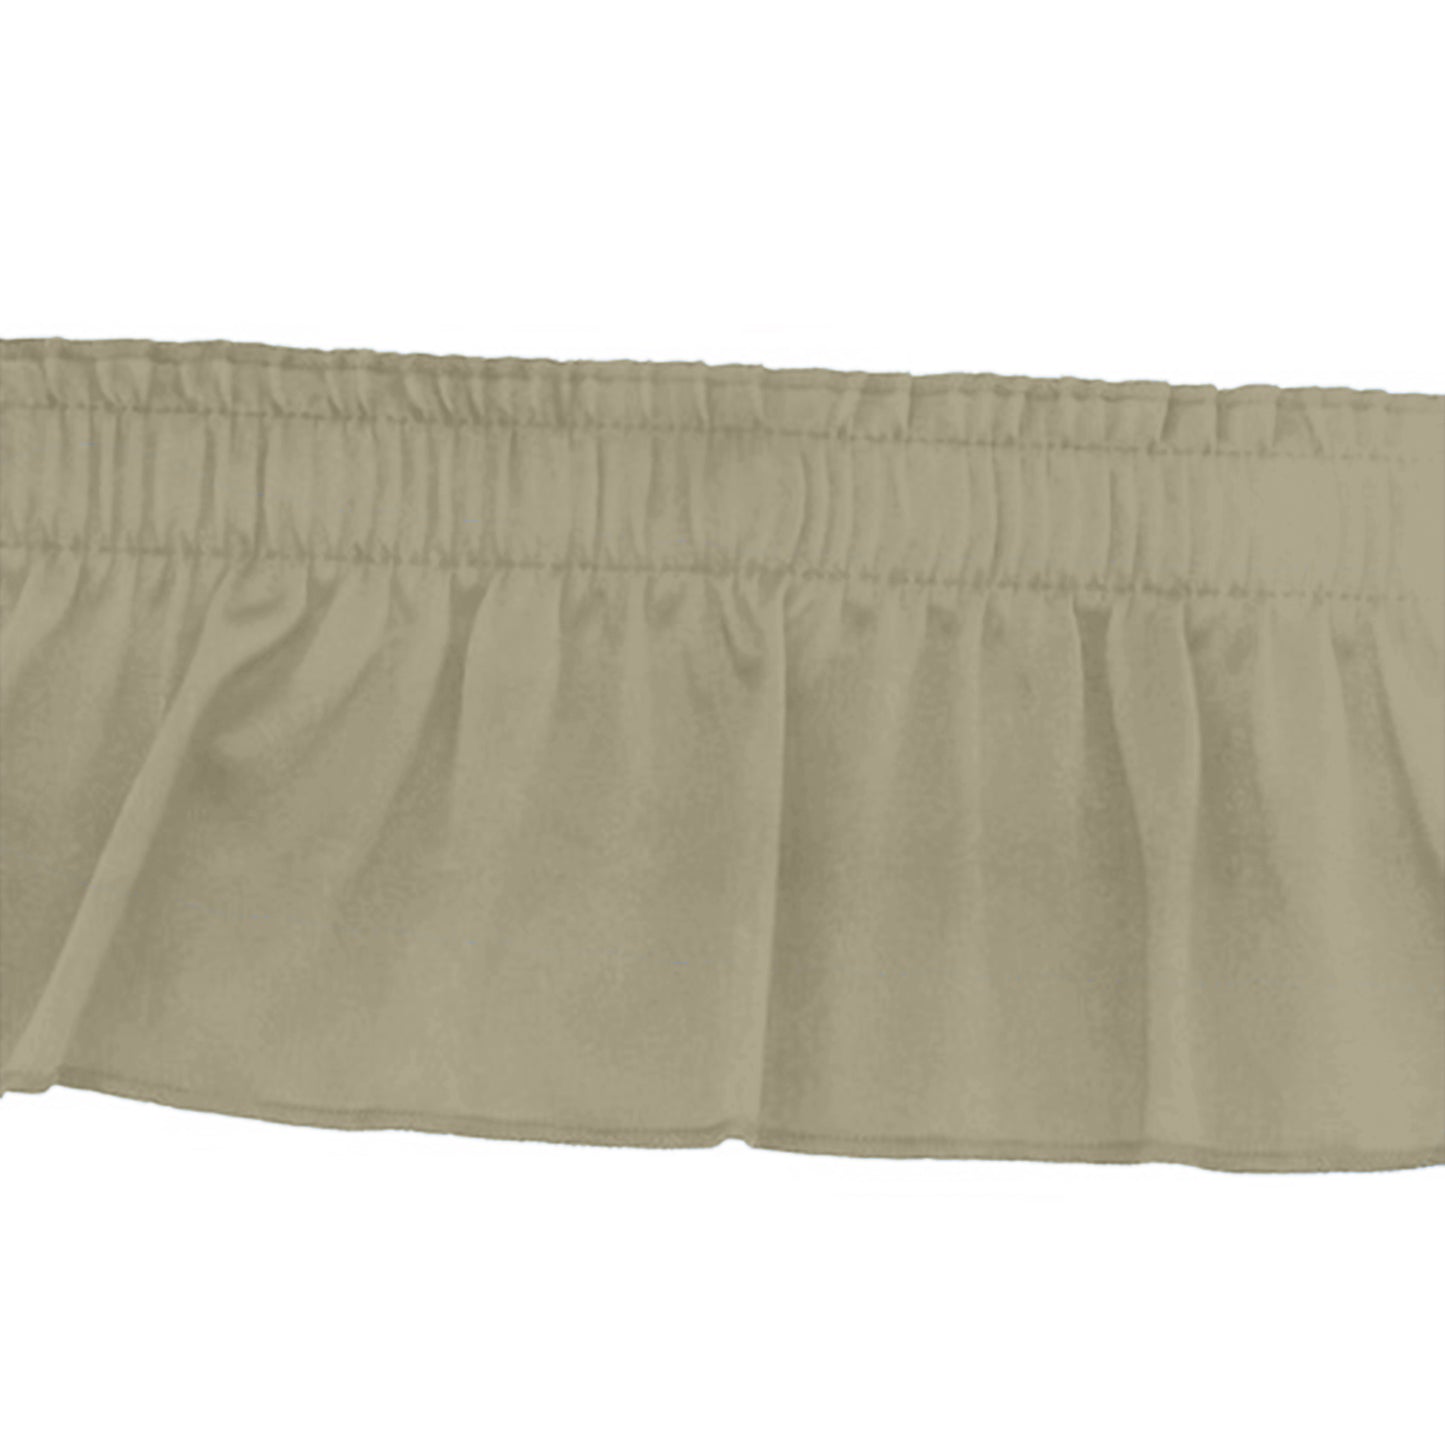 AmTab Stage and Riser Skirting - Shirred Pleat - 7" Skirting Height - Applicable for 8" Stage Height   (AmTab AMT-SKRT8)